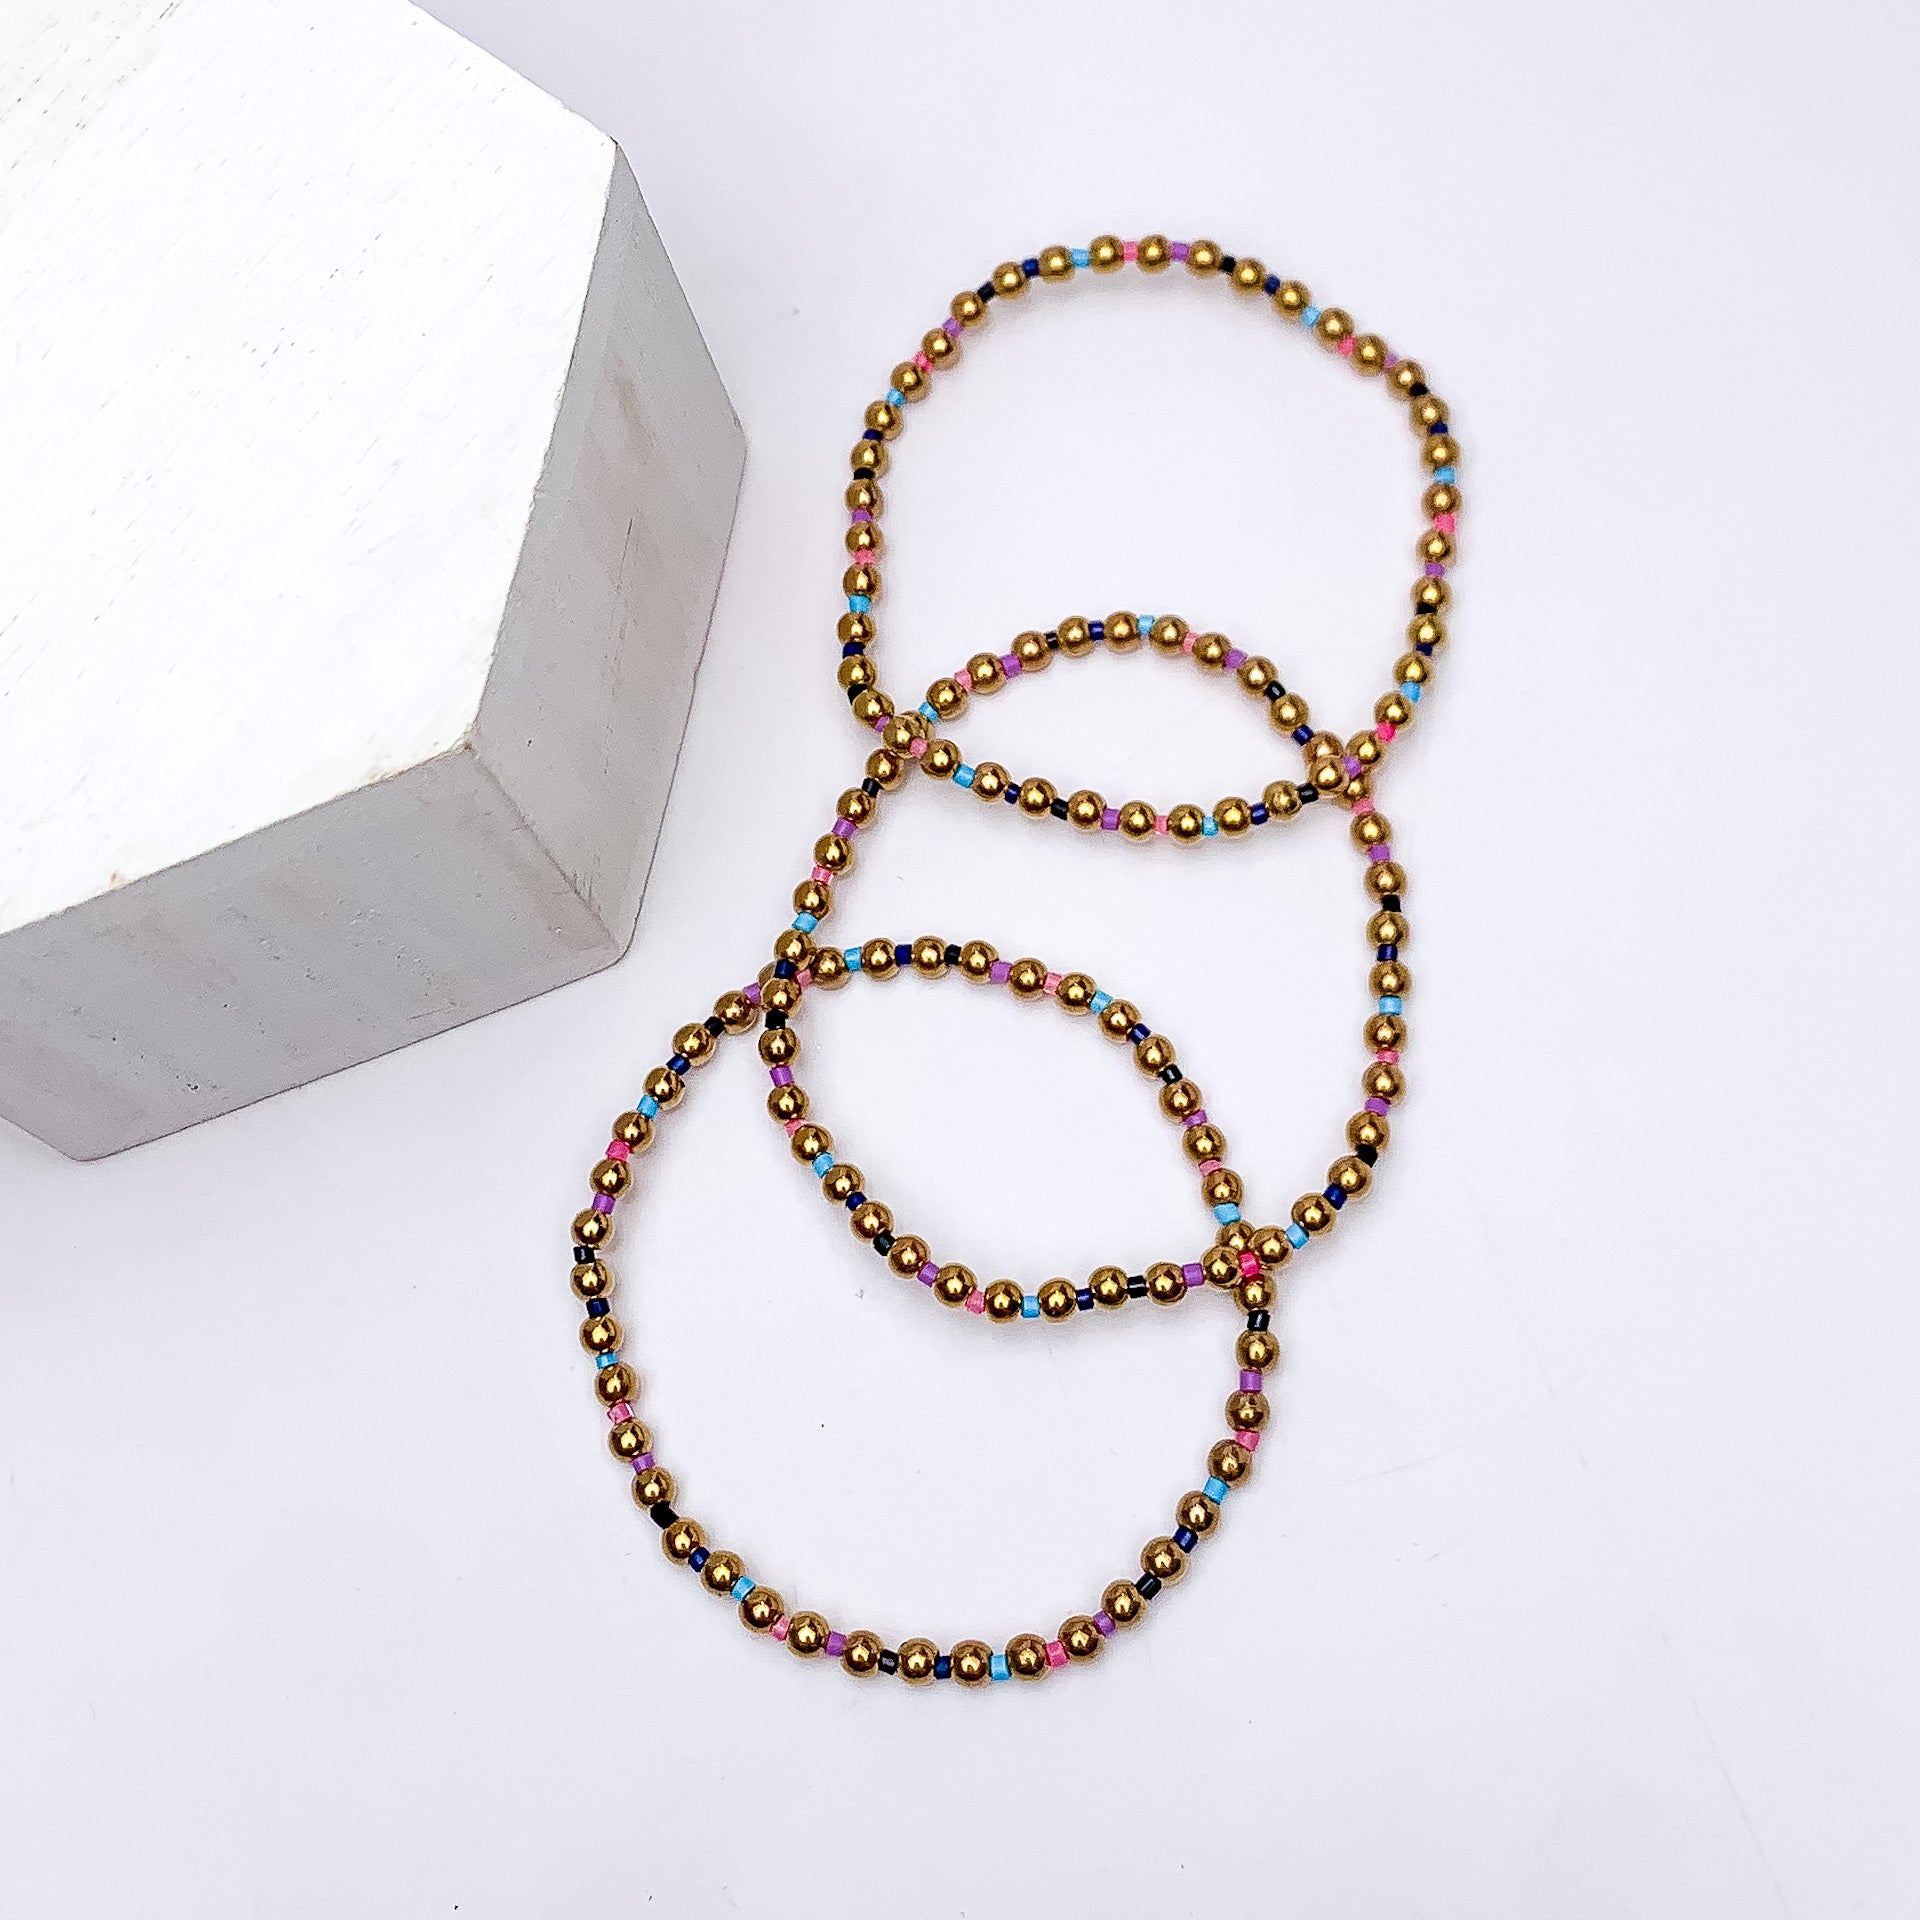 Set of Three | Stretchy Gold Tone Beaded Bracelets With Spacers in Multicolor - Giddy Up Glamour Boutique